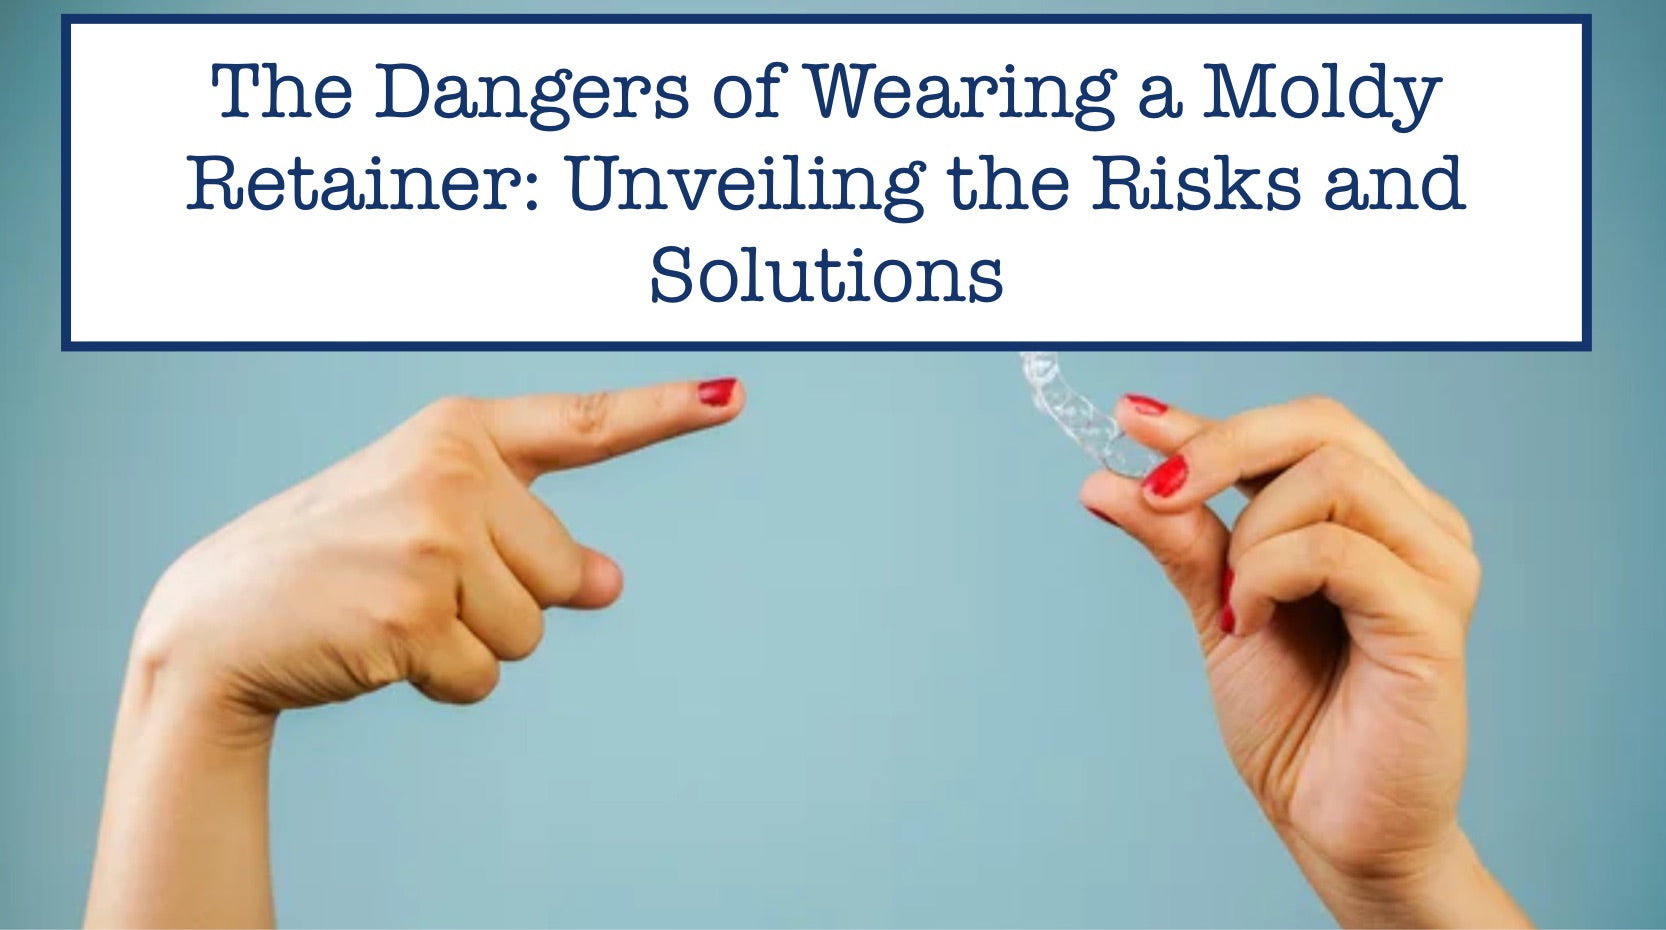 The Dangers of Wearing a Moldy Retainer: Unveiling the Risks and Solutions